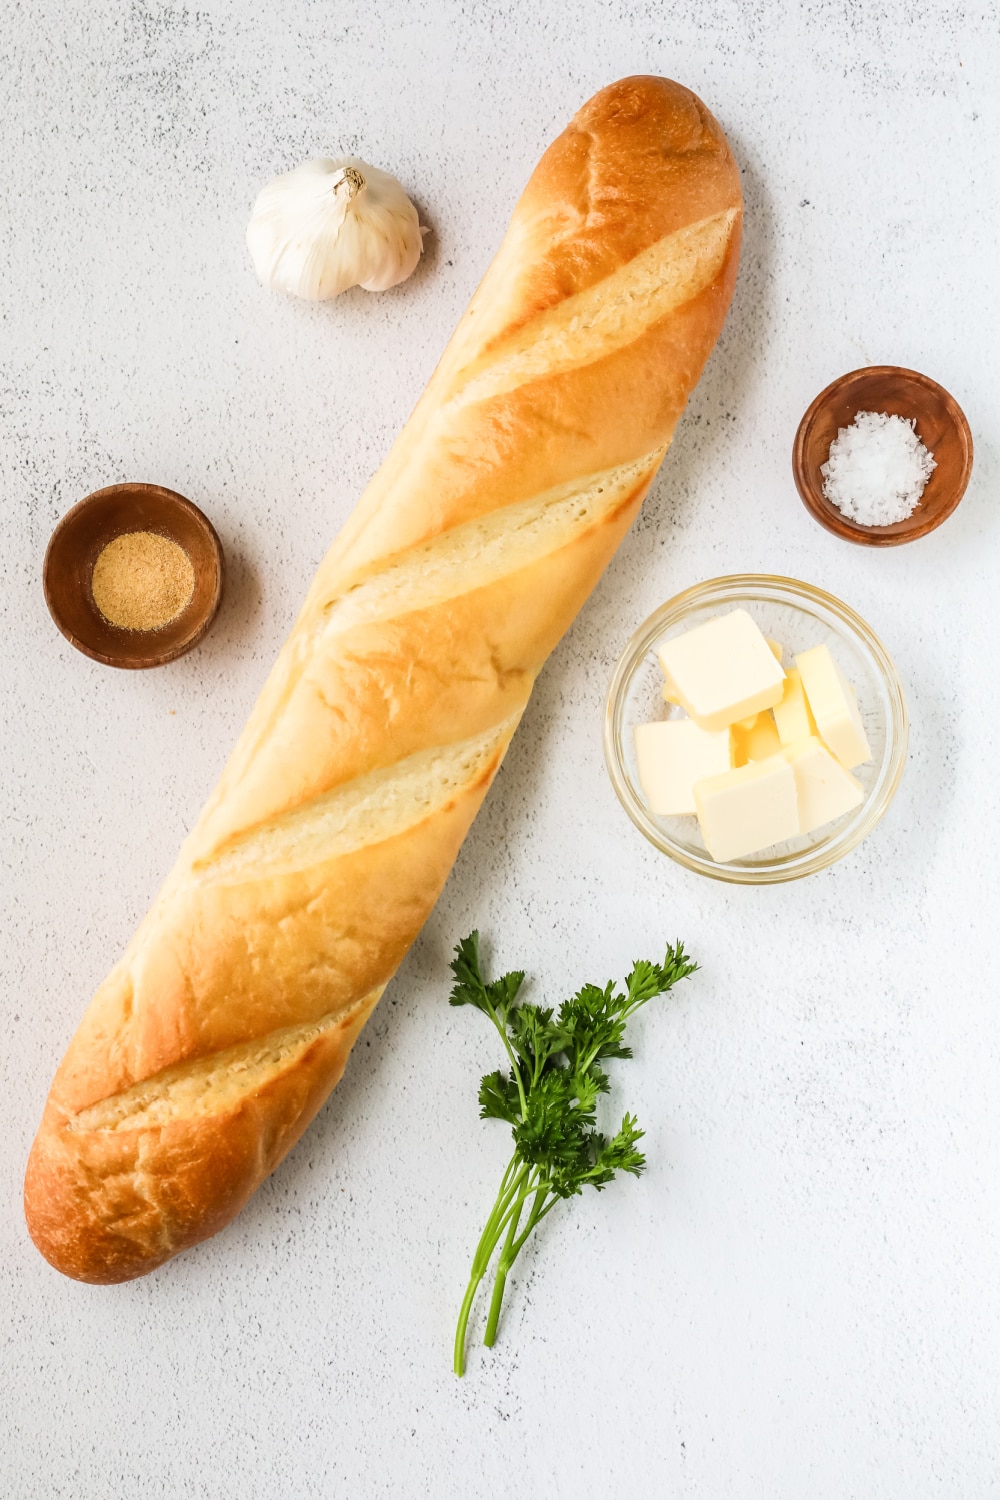 A loaf of Italian bread surrounded by measured ingredients needed for this recipe.